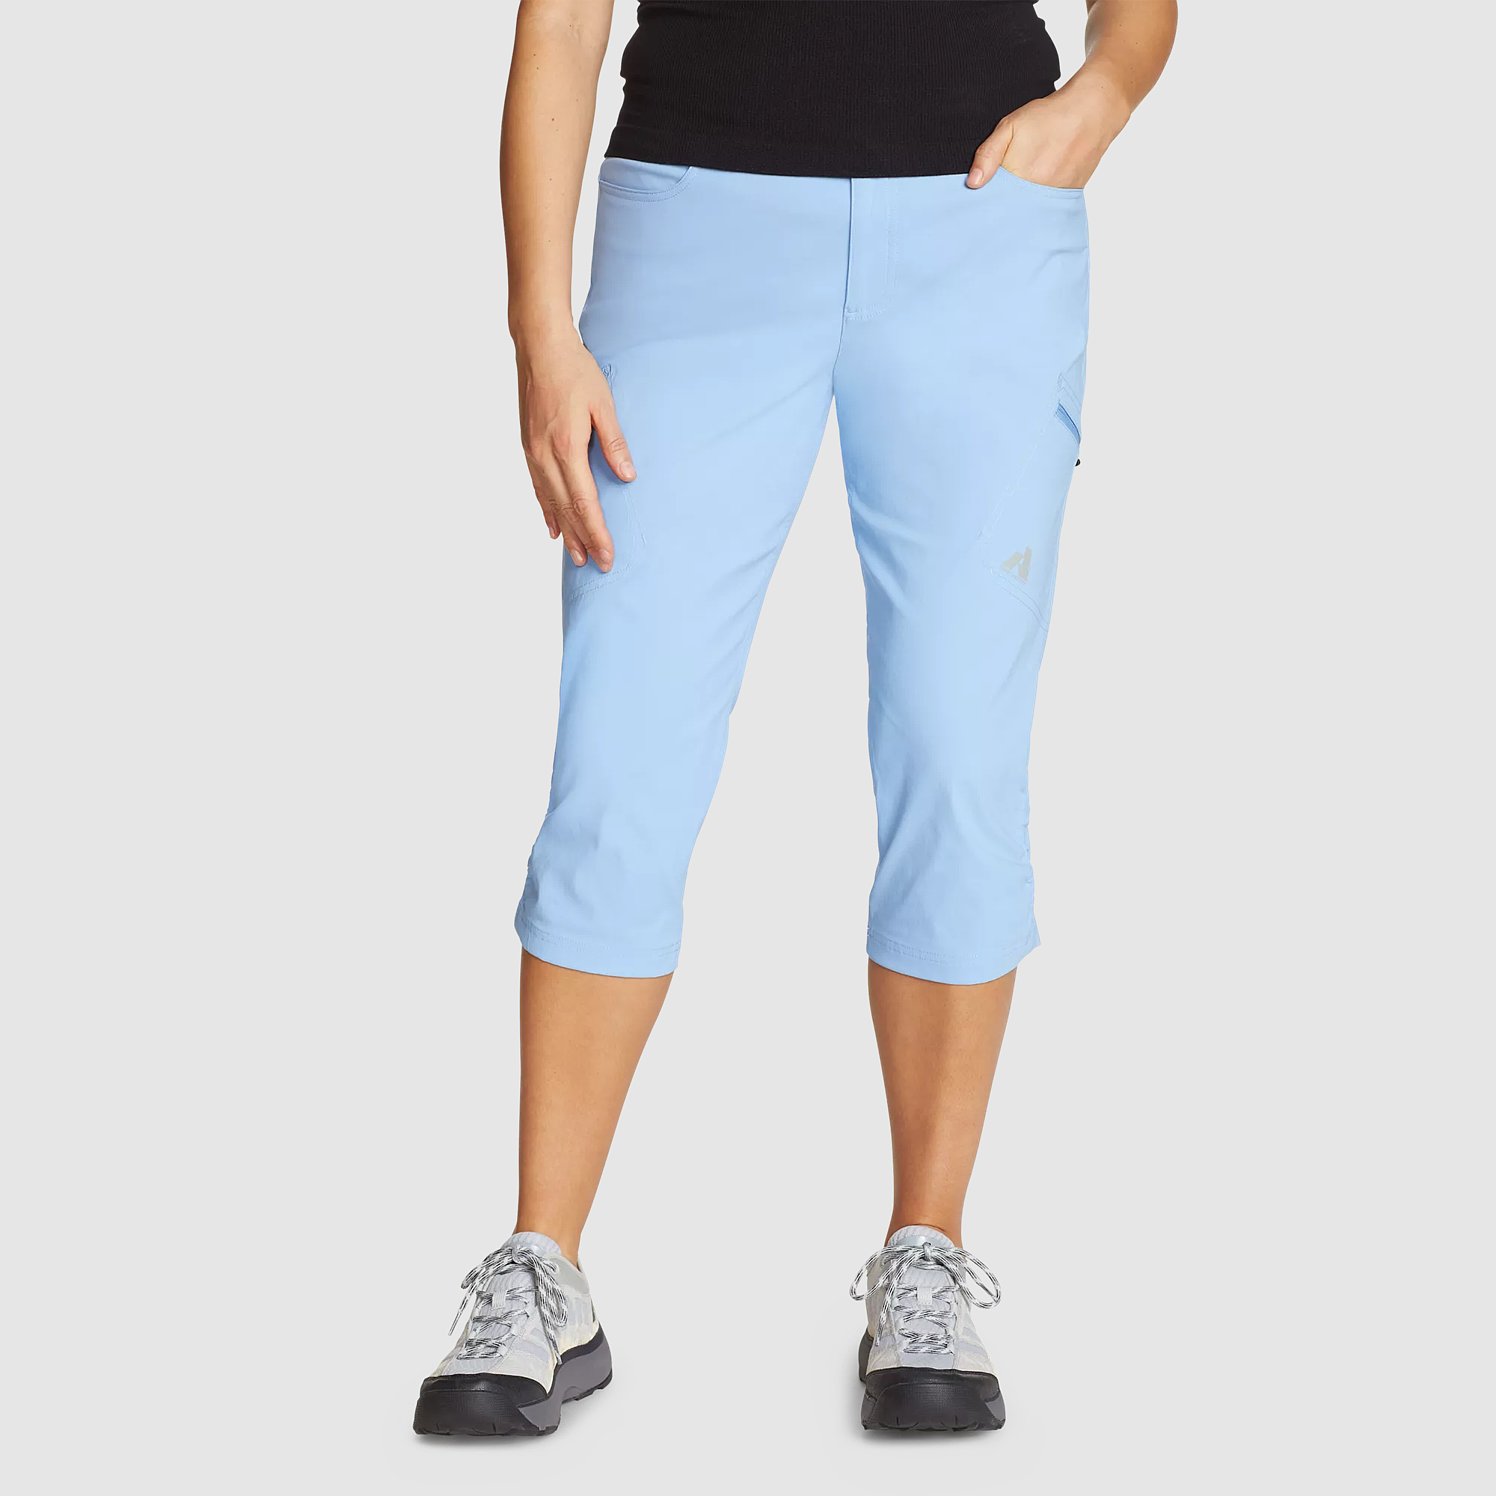 Buy Club A9 Womens Regular Fit Solid Cotton Capri Pants for Daily